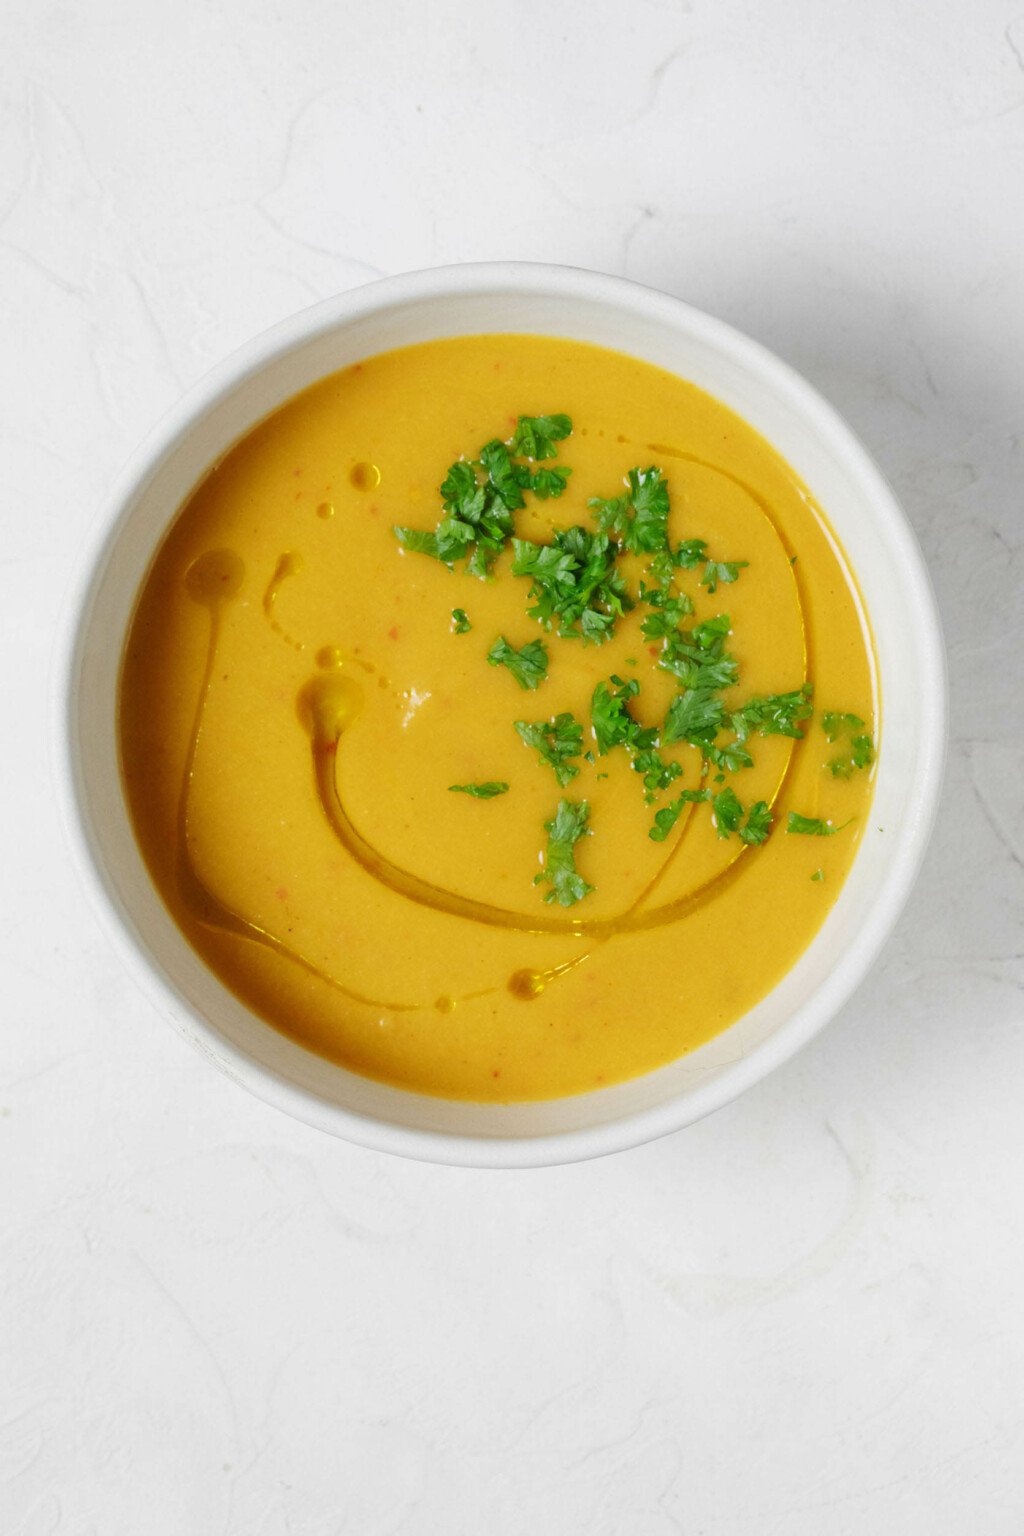 An overhead image of a white bowl, which is filled with an orange-hued creamy curried cauliflower soup, garnished with snipped herbs.